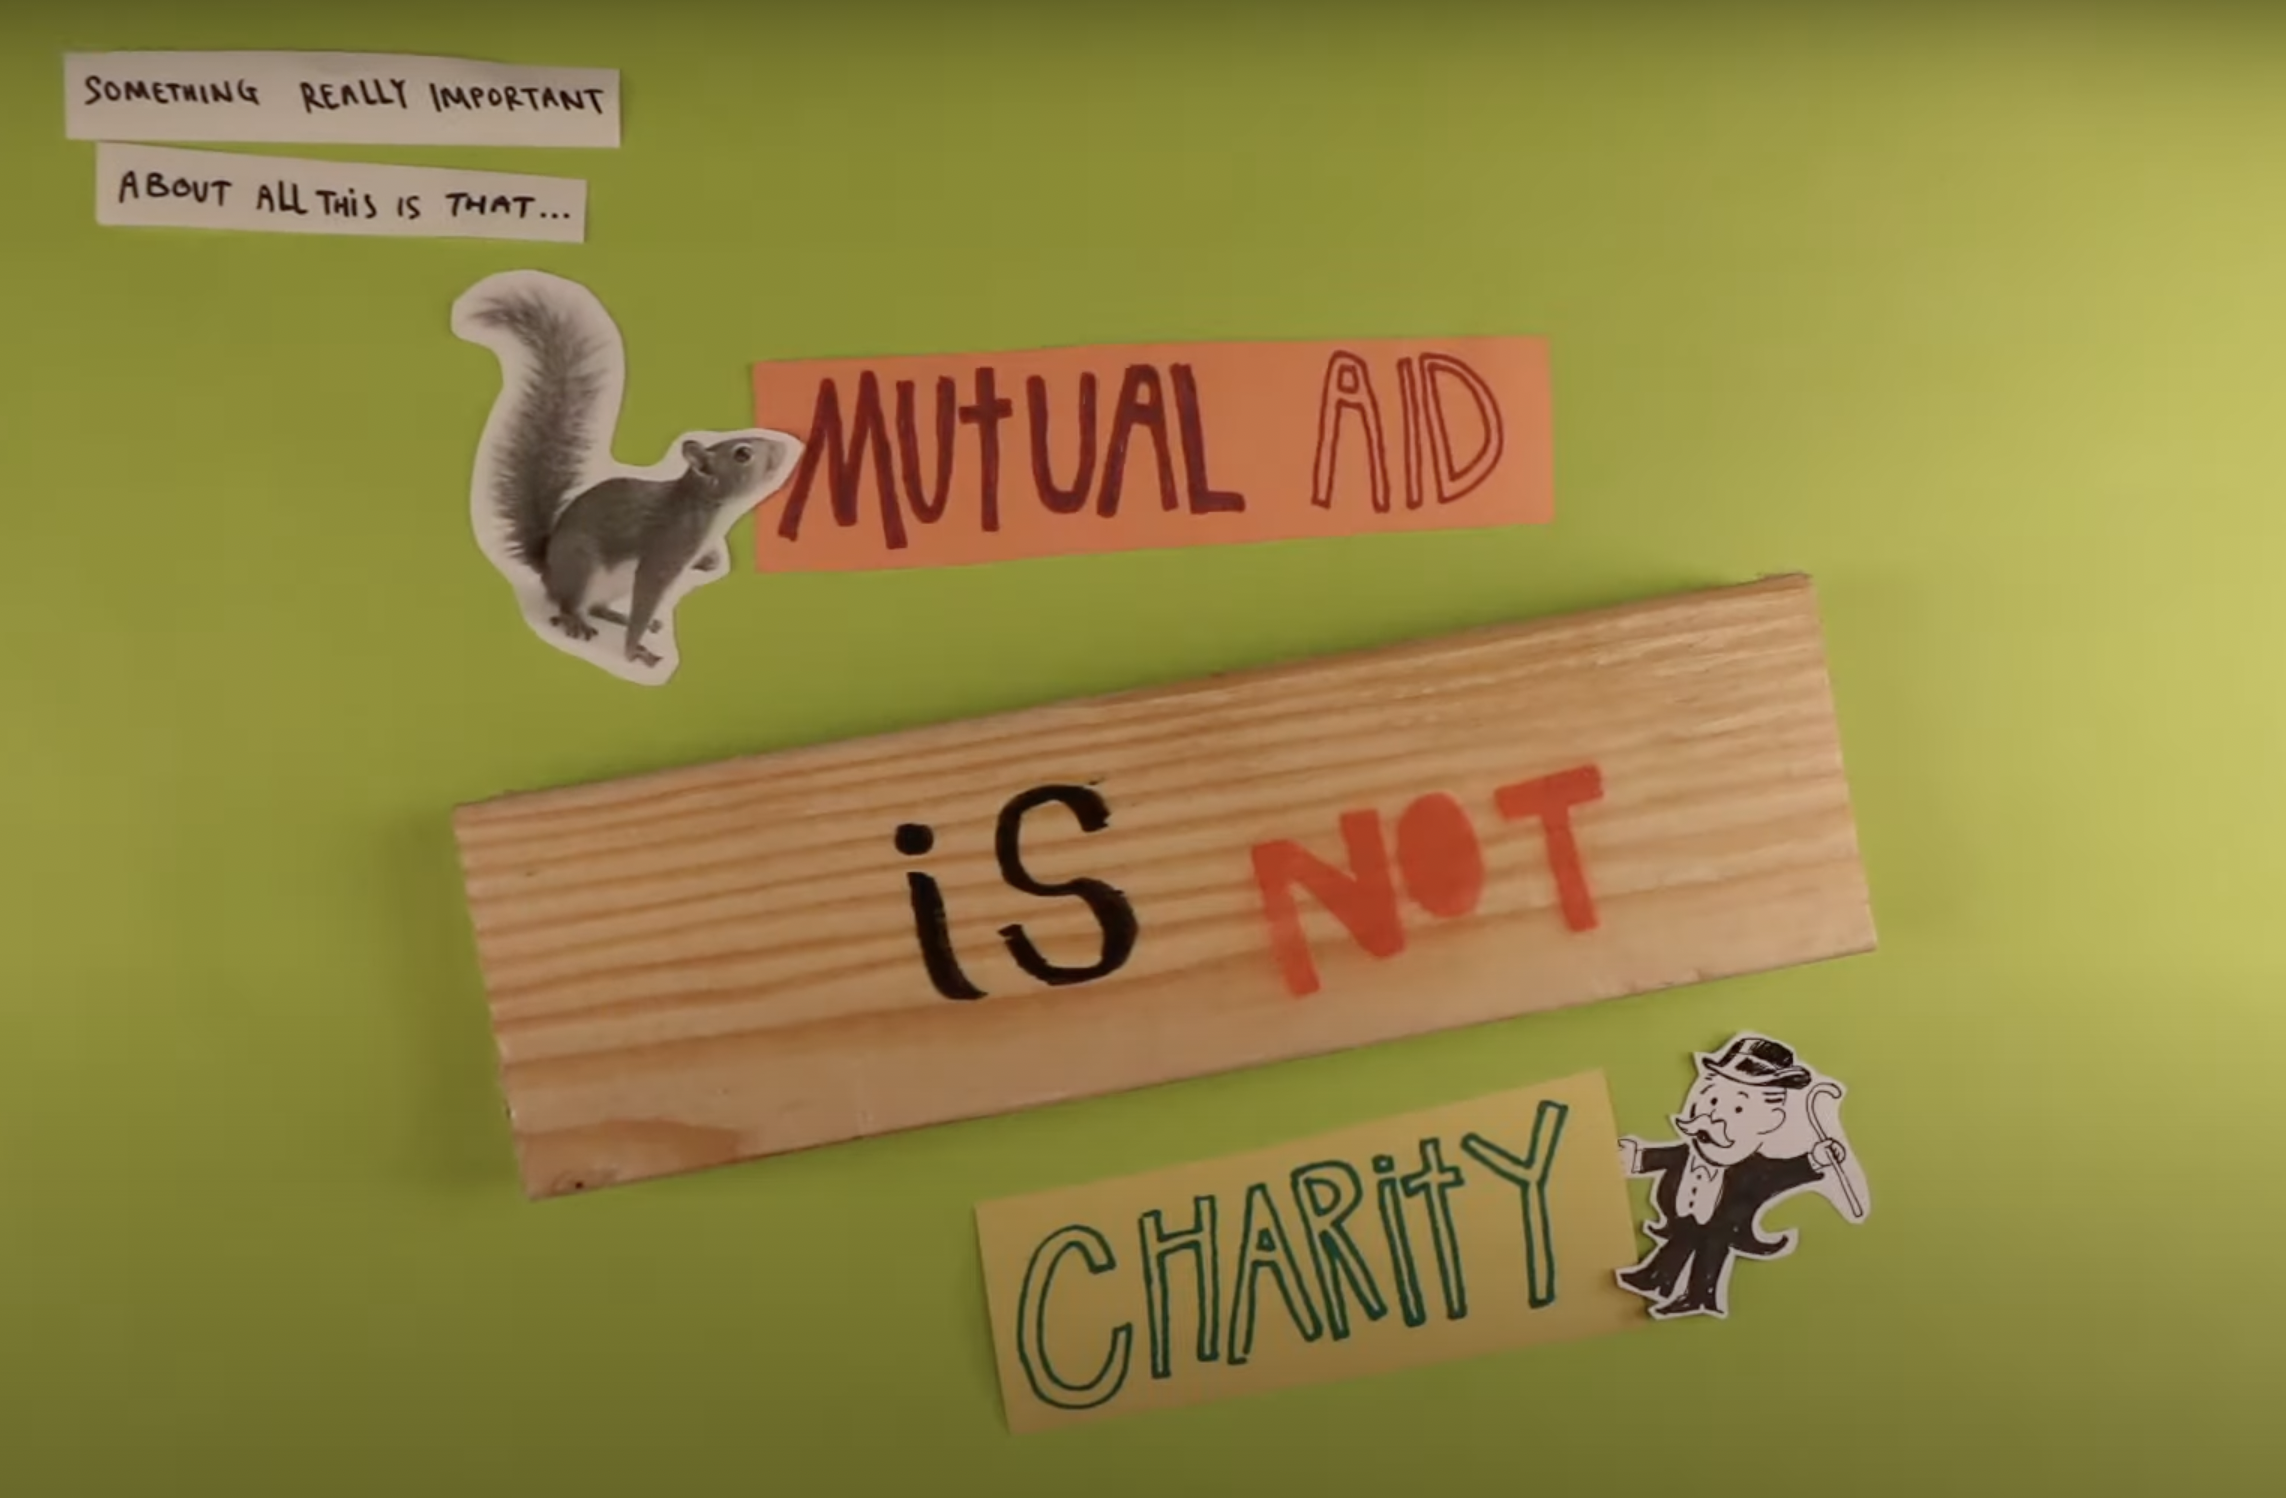 Still from animated film ‘shit’s totally fucked! What can we do? A mutual aid explainer’ – text and illustrations on paper and wood, that spells out “something really important about all this is that Mutual Aid is not Charity”